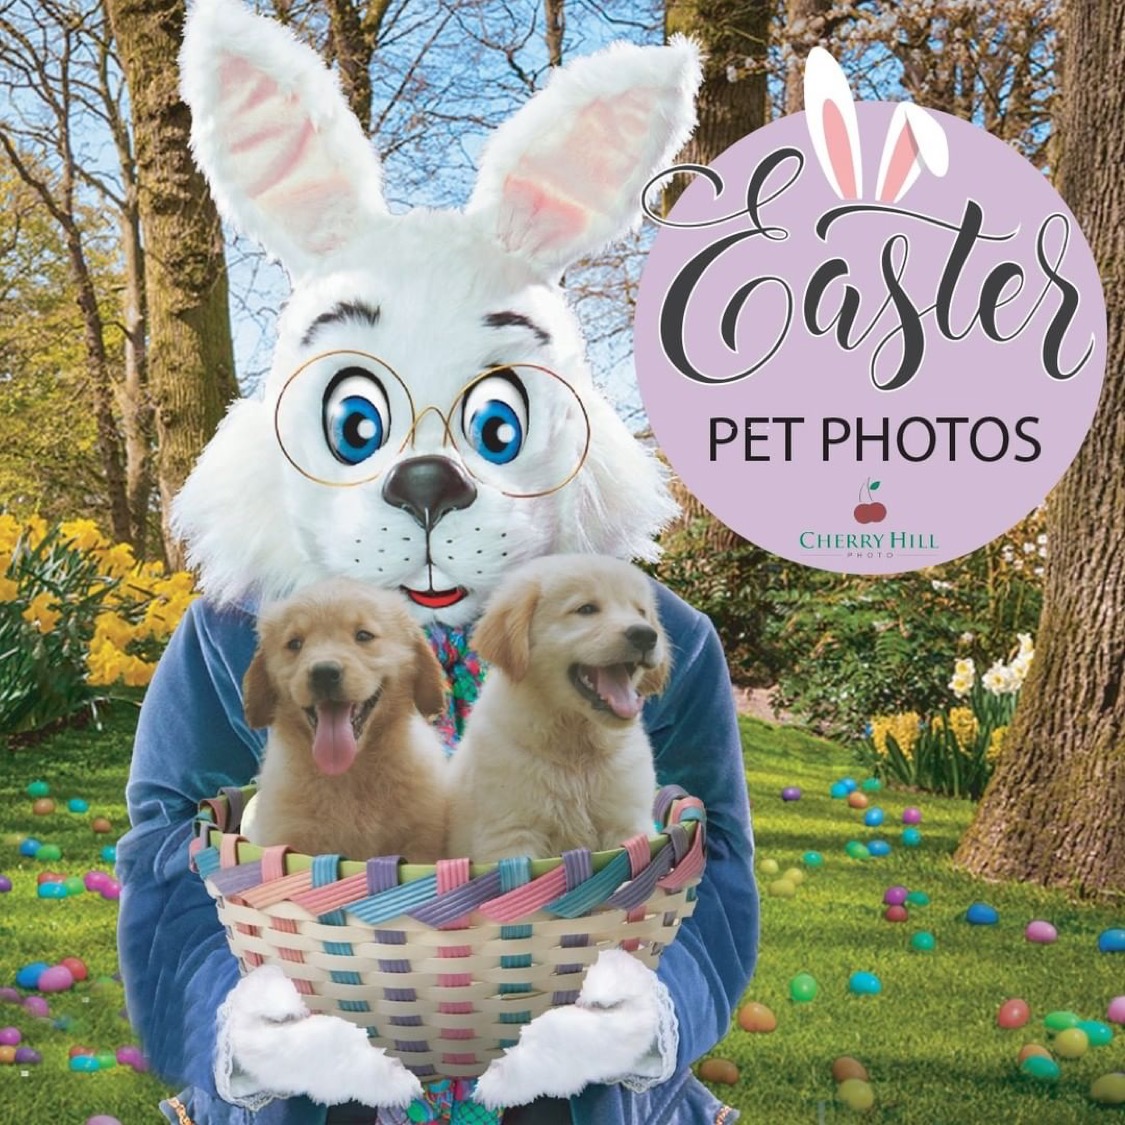 Enjoy Virtual Pet Photos this Easter with Seaway Mall!